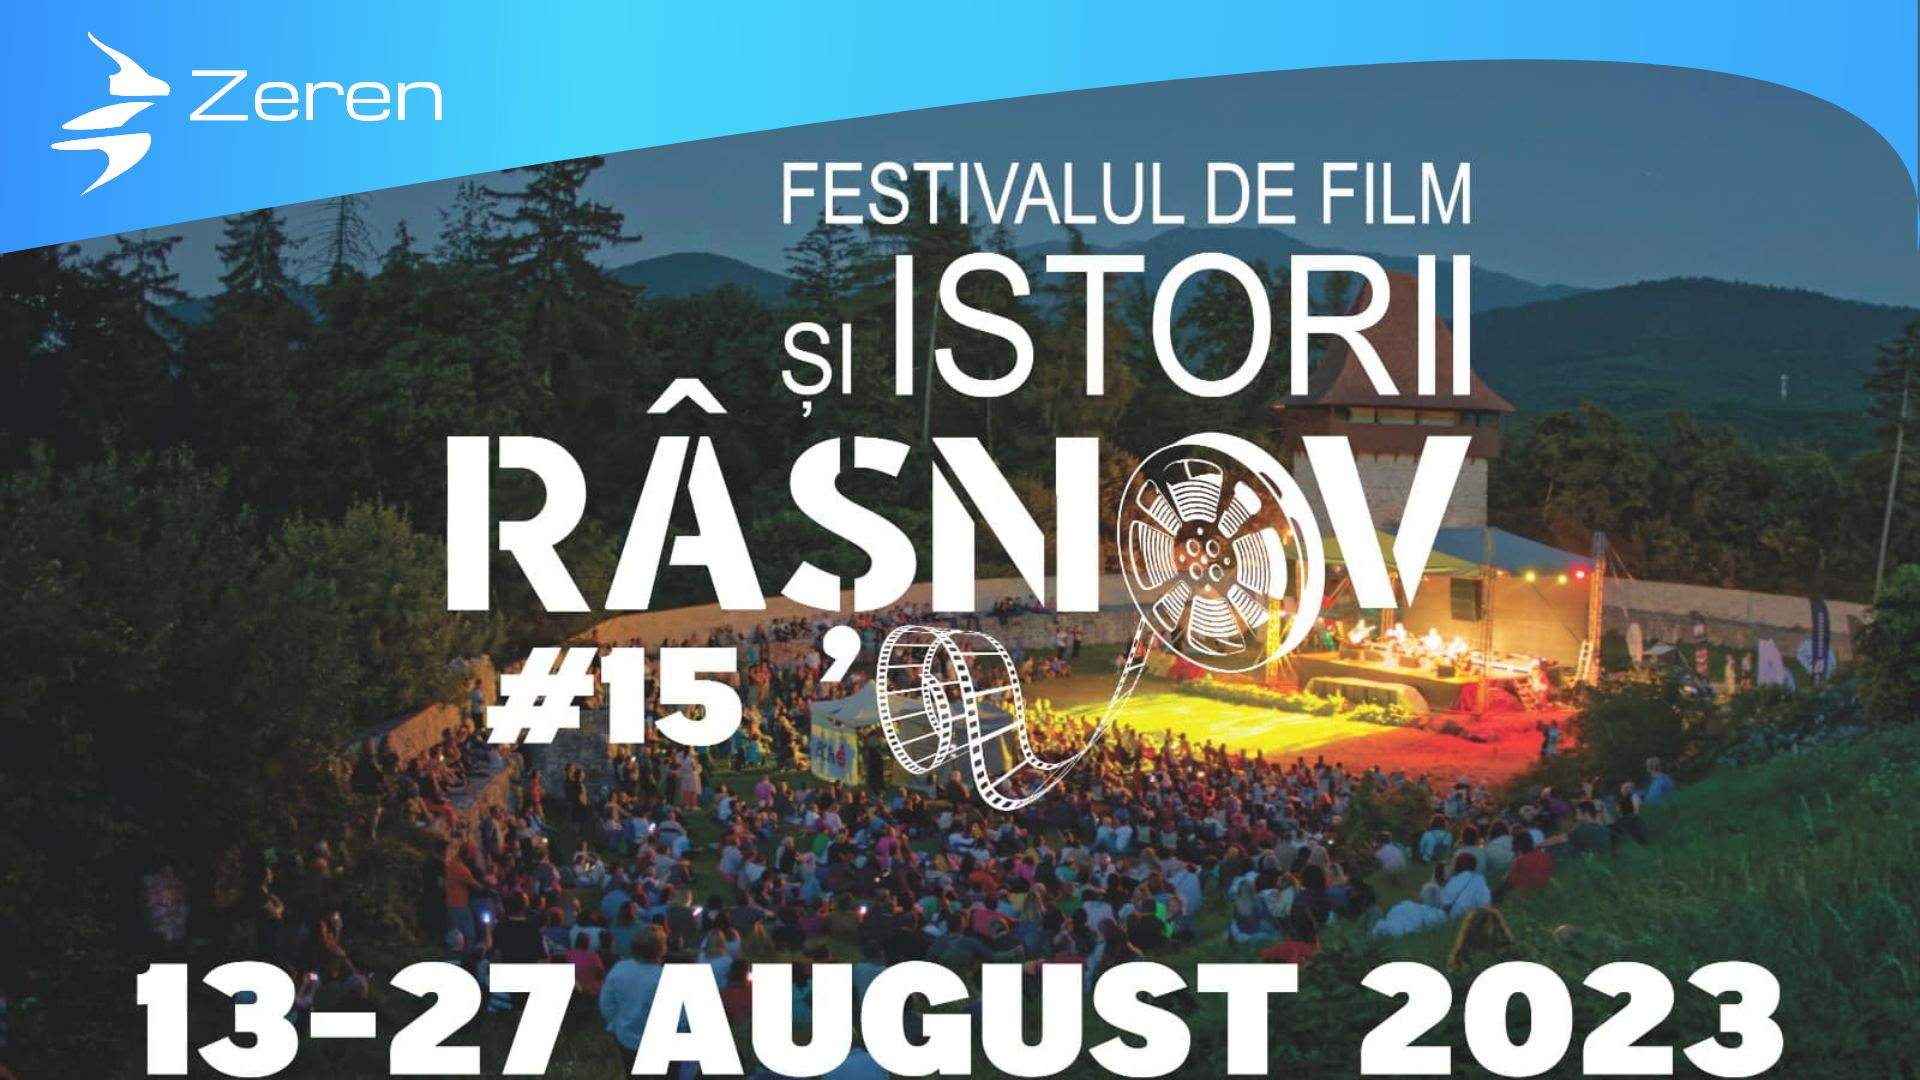 Celebrating Creativity and Cinema: Zeren, sponsor of the 15th edition of the Râșnov Film and History Festival